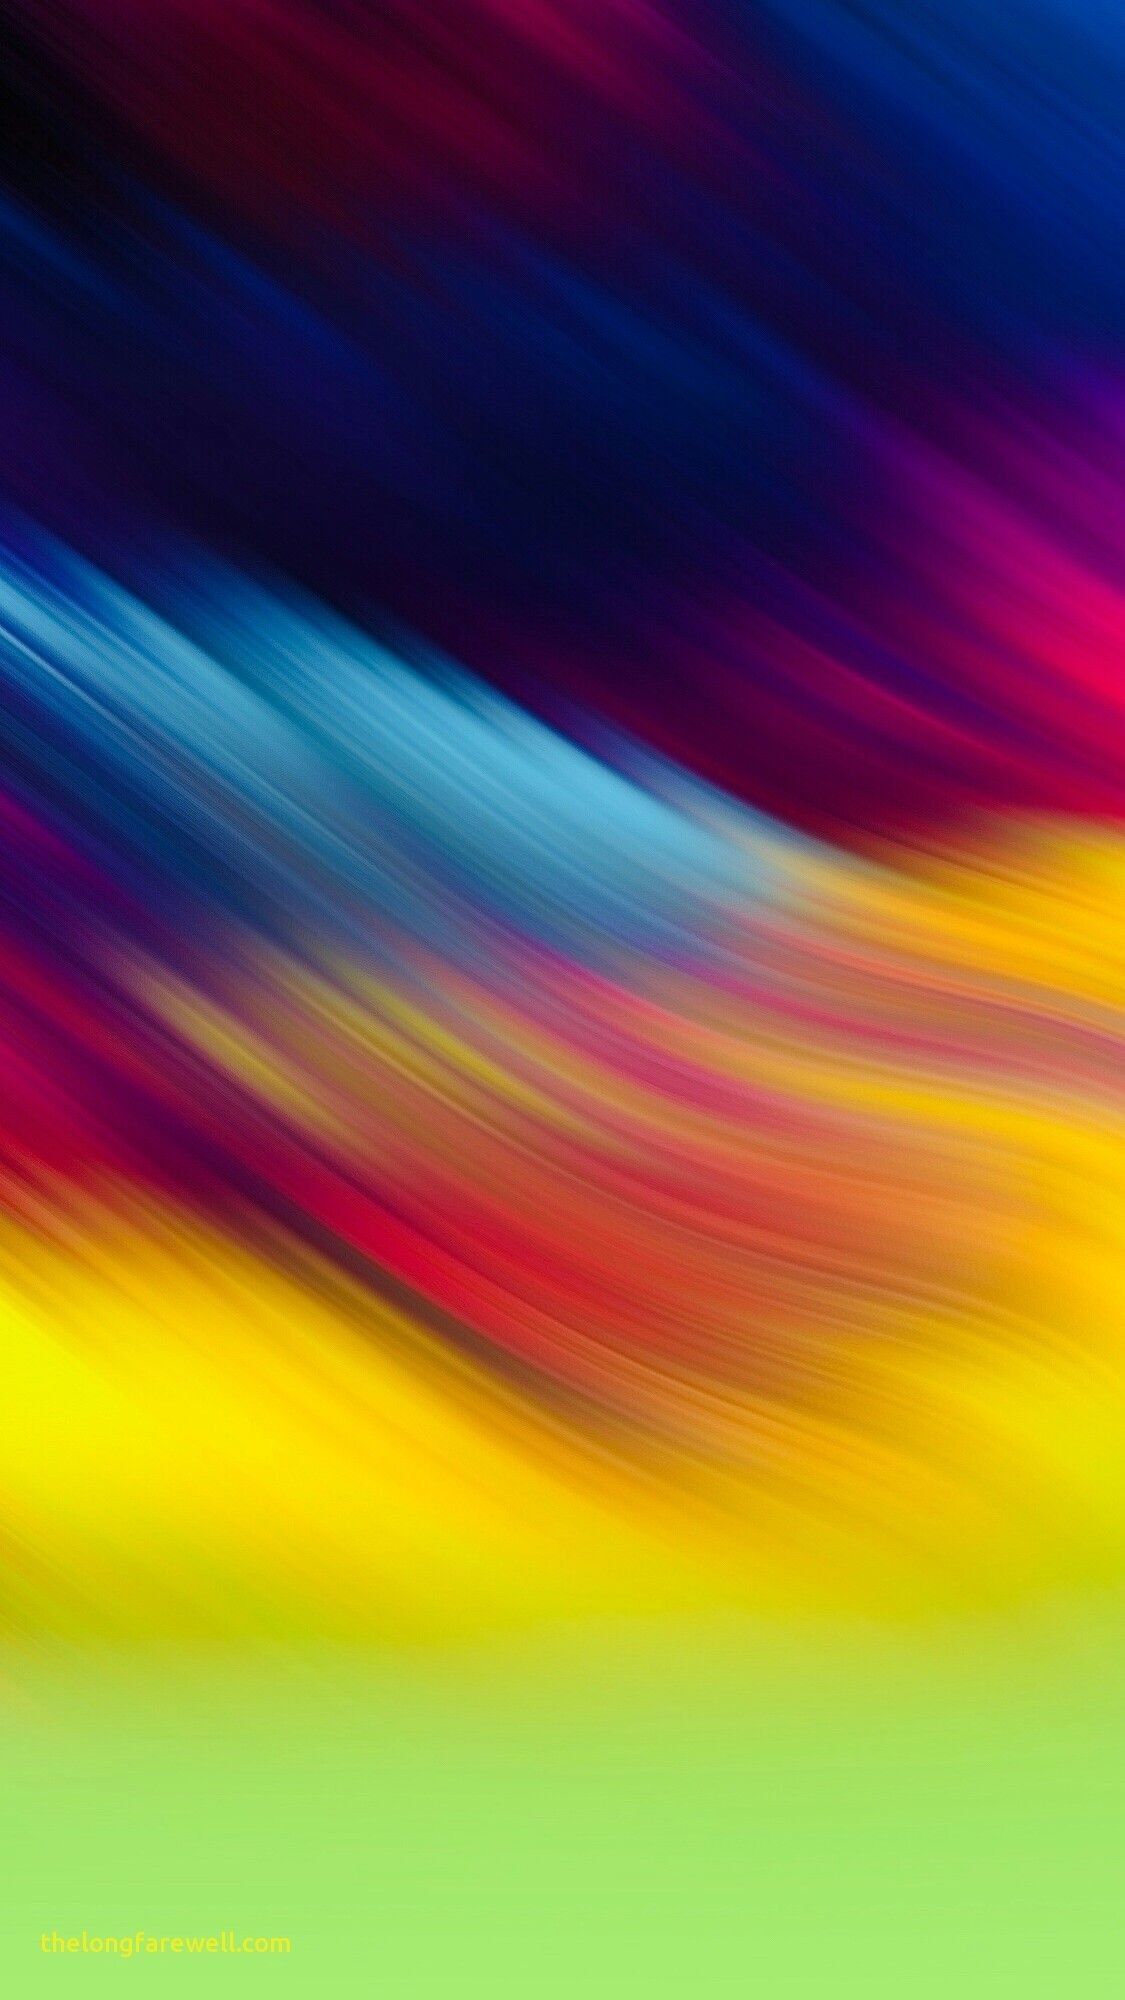 Purple Blue Orange And Red HD 4k Wallpaper And Background Wallpaper iPhone